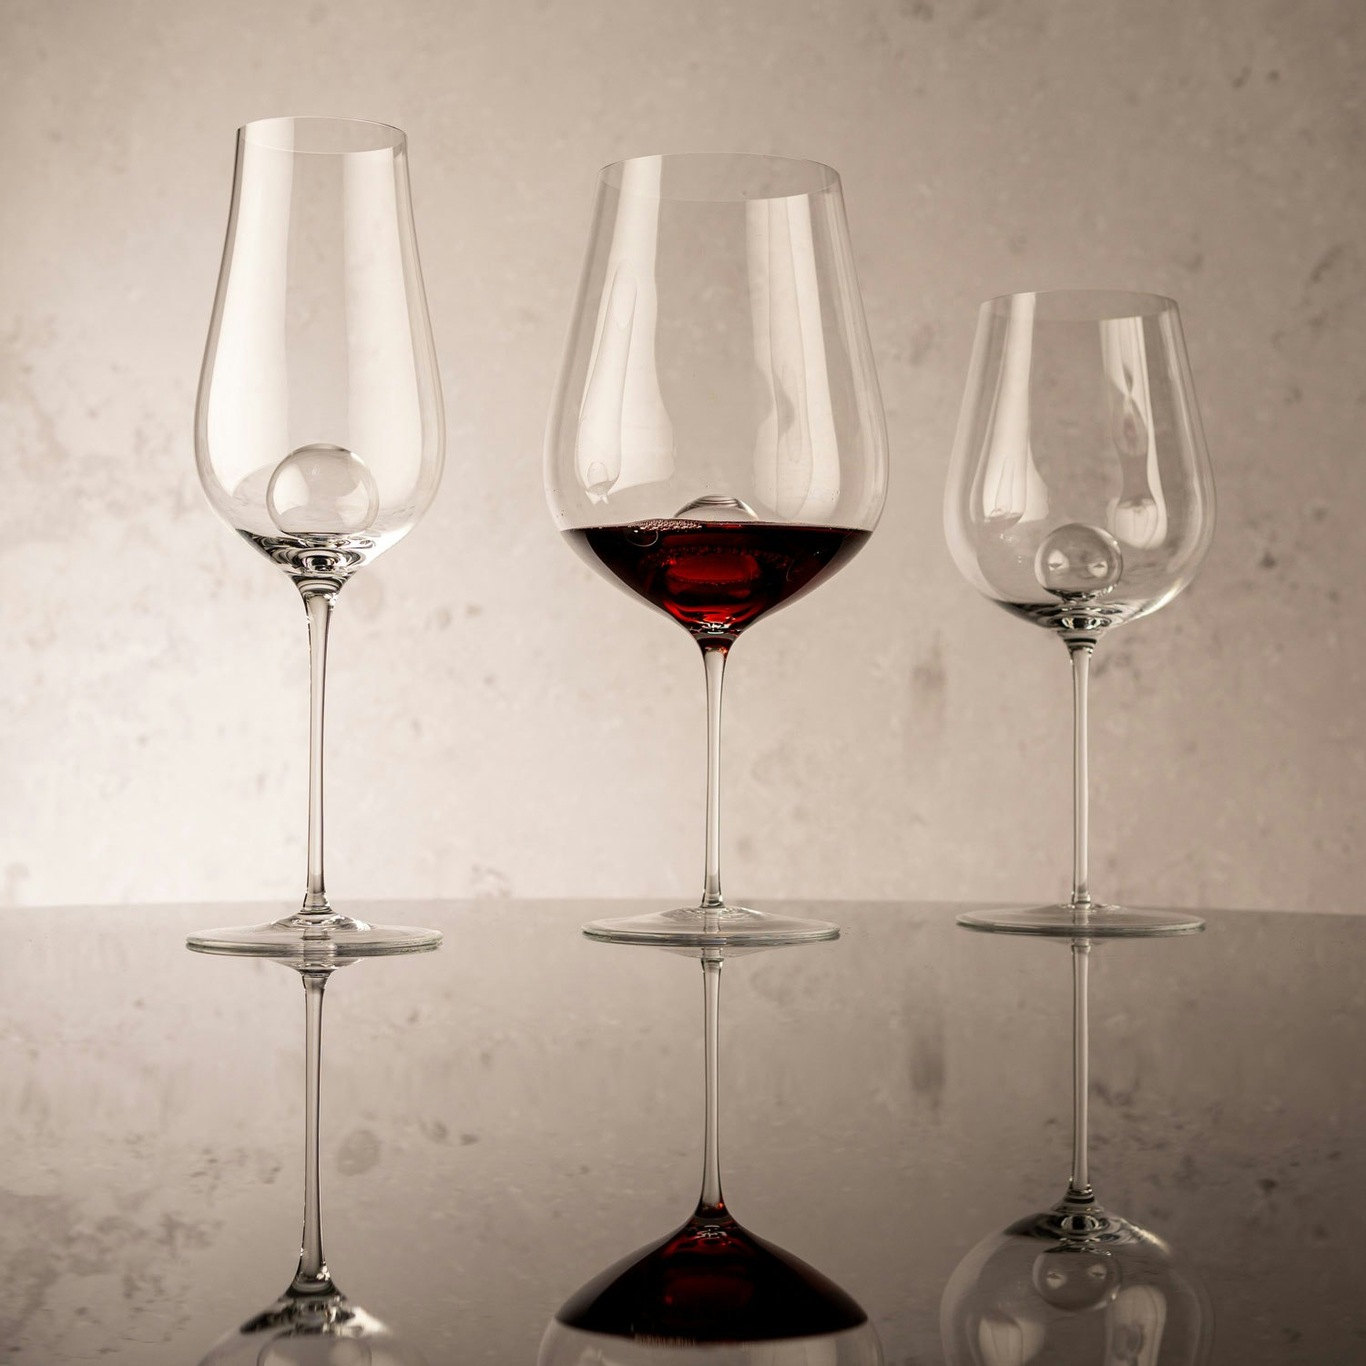 https://royaldesign.com/image/2/zwiesel-air-sense-bordeaux-red-wine-glass-84-cl-2-pack-0?w=800&quality=80